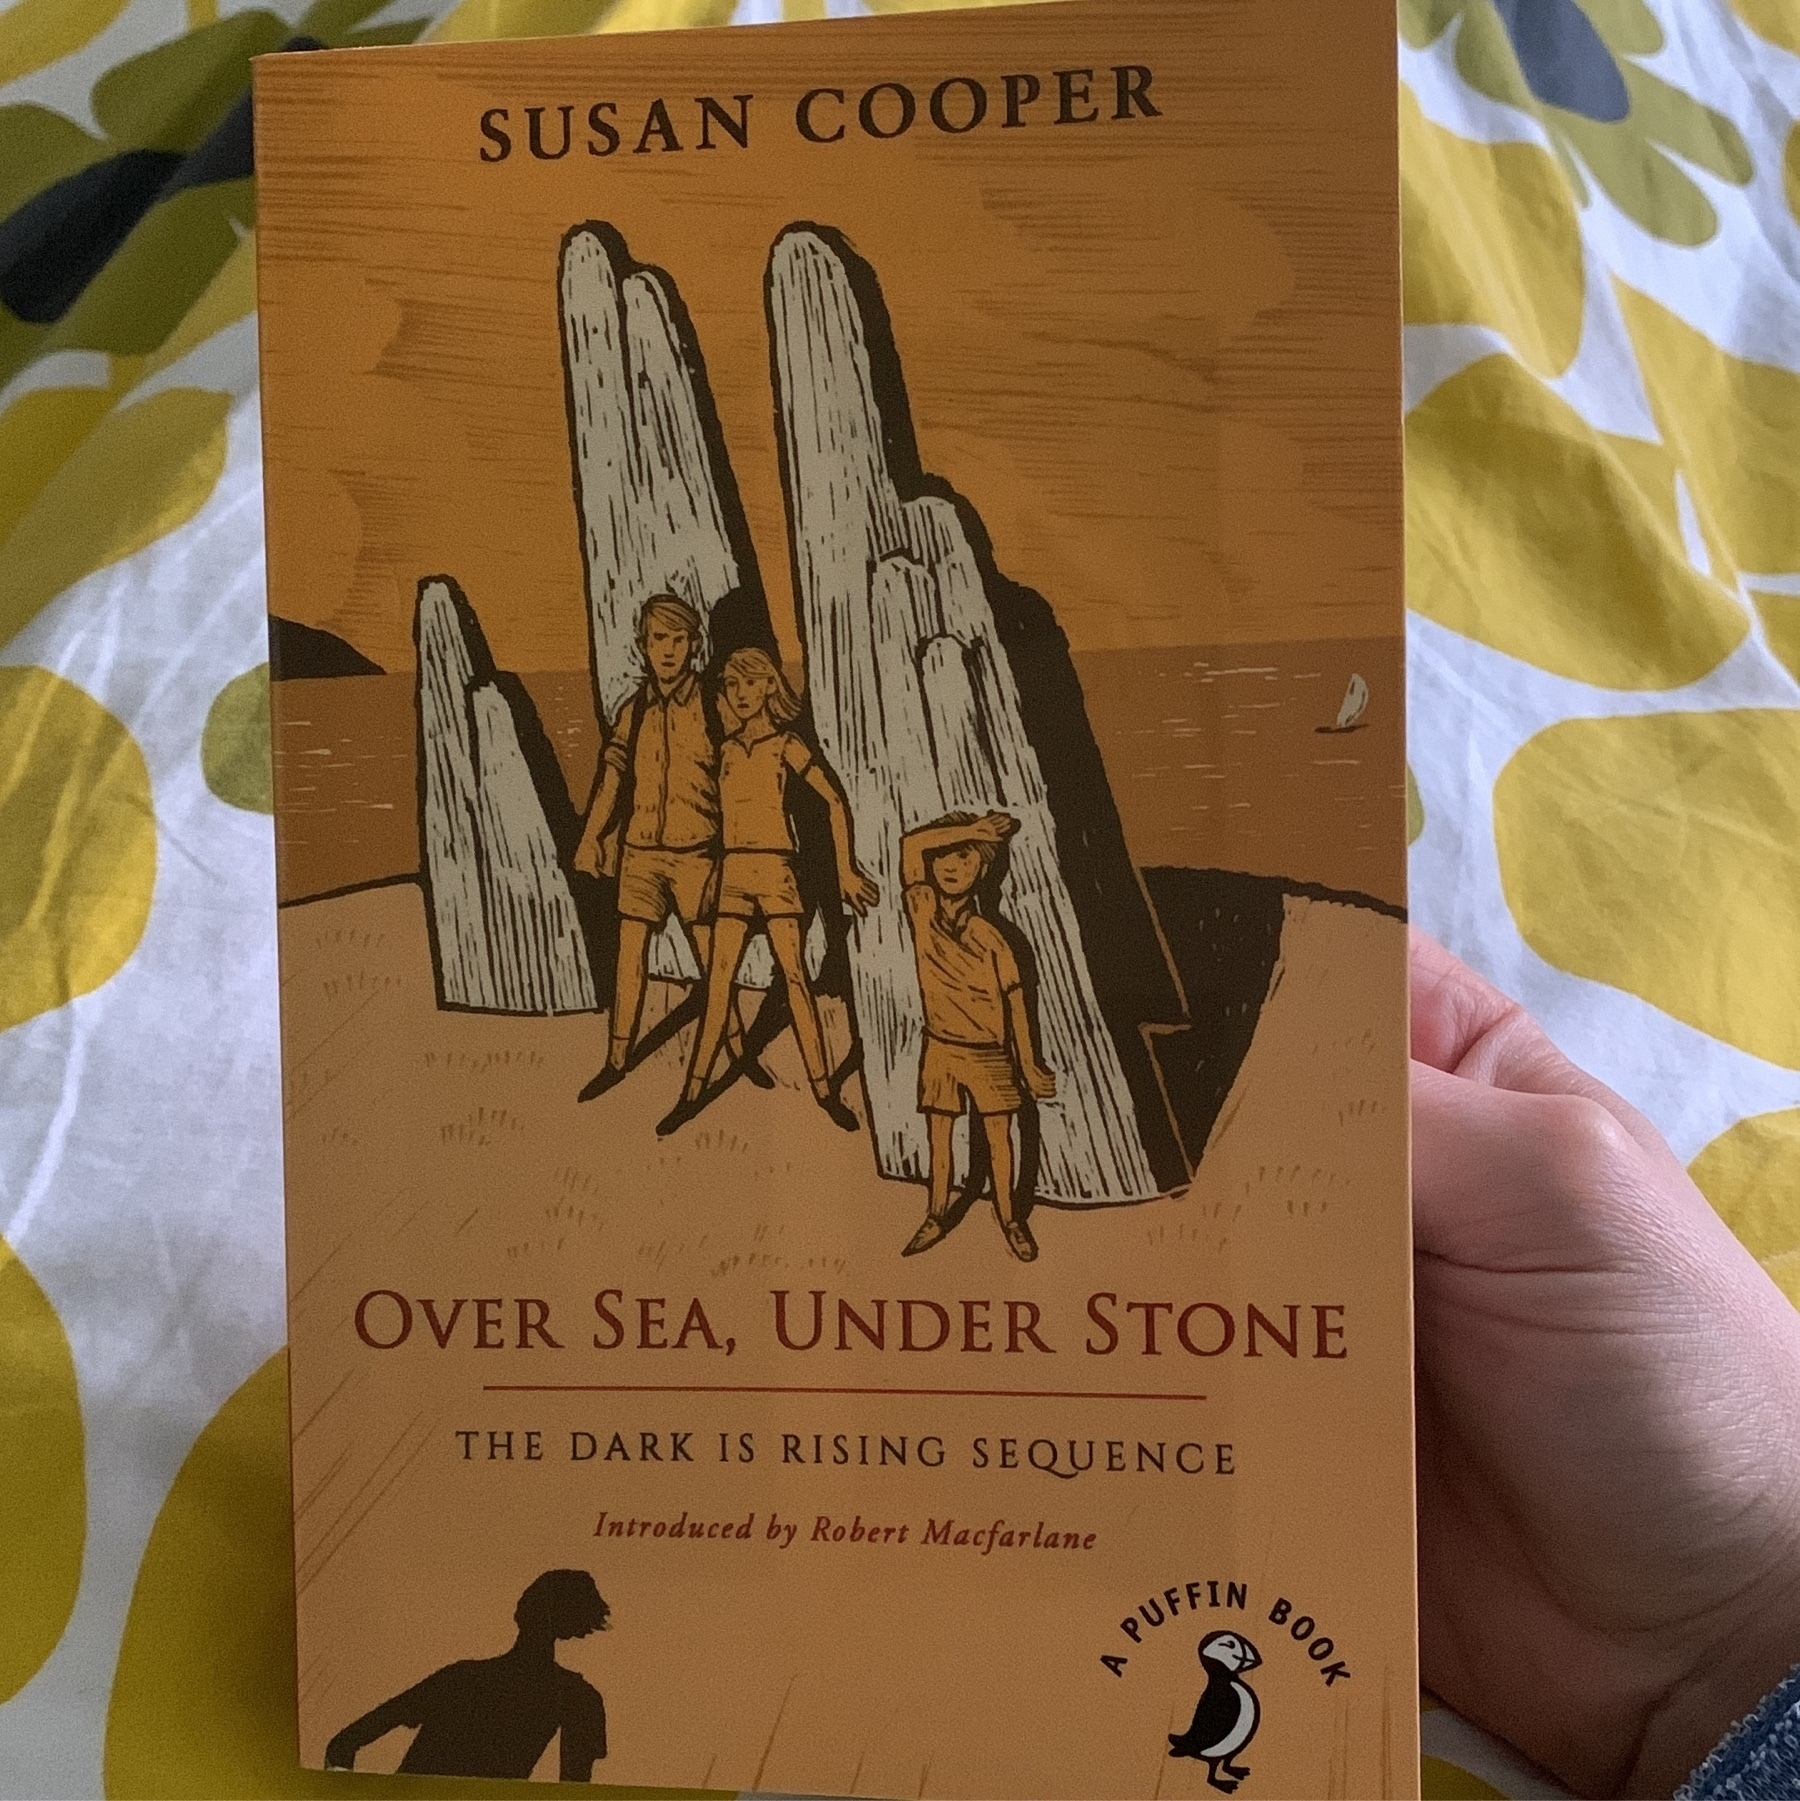 Book cover of Over Sea, Under Stone by Susan Cooper. Background is a duvet cover with bold yellow flower design.